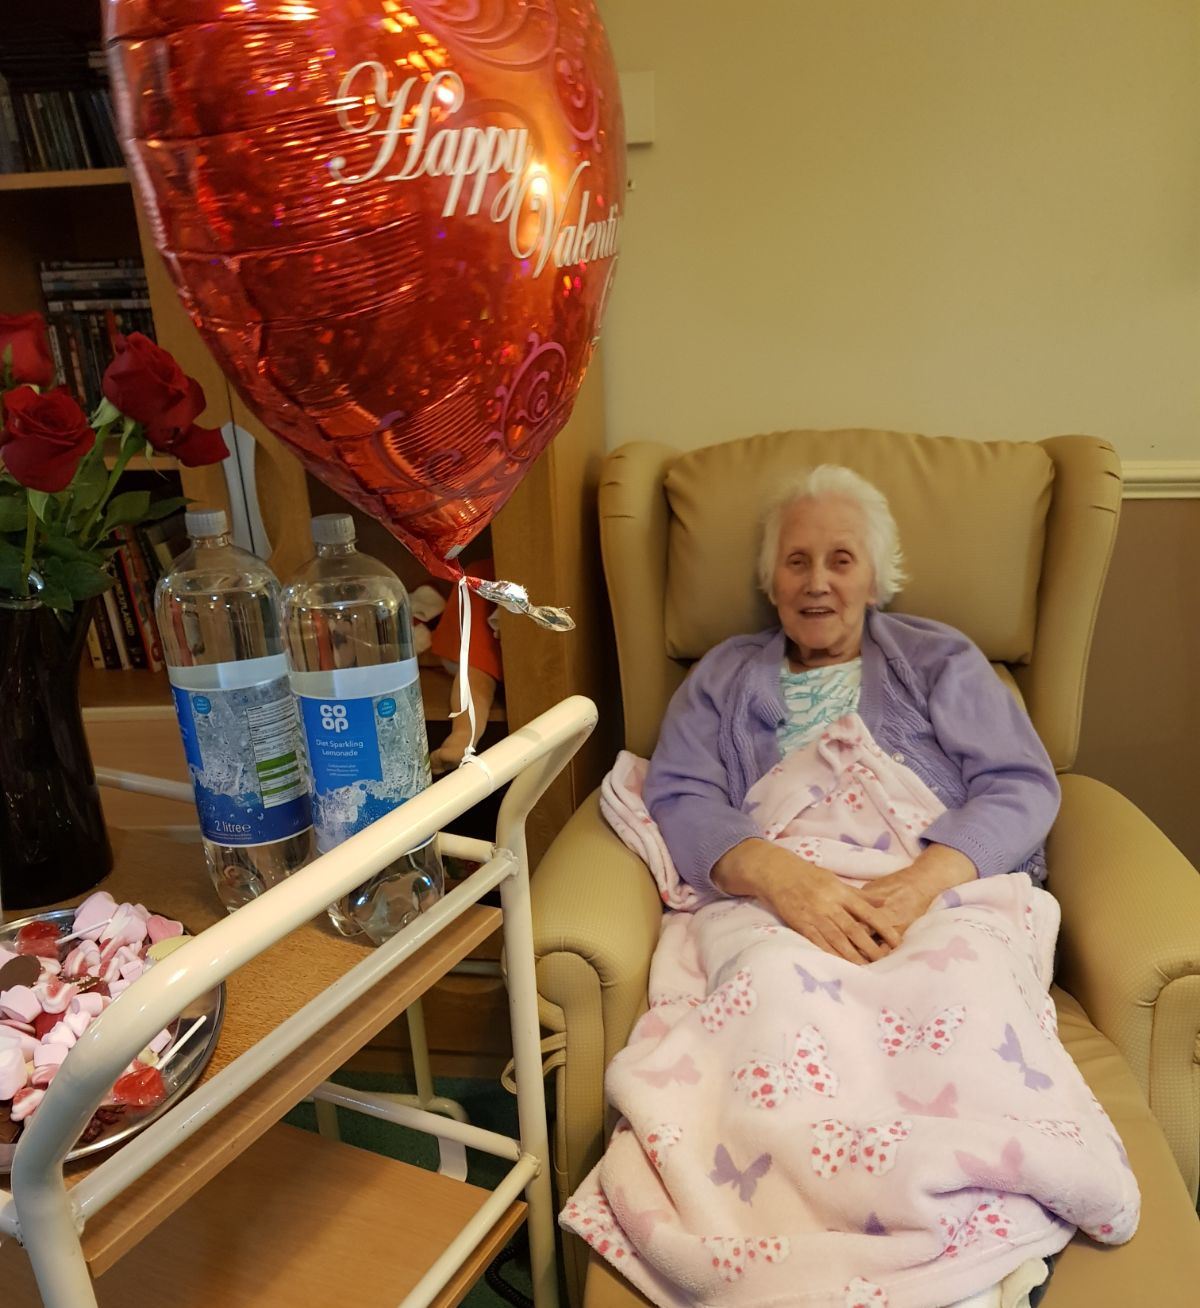 The Love Trolley 14th Feb 2018: Key Healthcare is dedicated to caring for elderly residents in safe. We have multiple dementia care homes including our care home middlesbrough, our care home St. Helen and care home saltburn. We excel in monitoring and improving care levels.